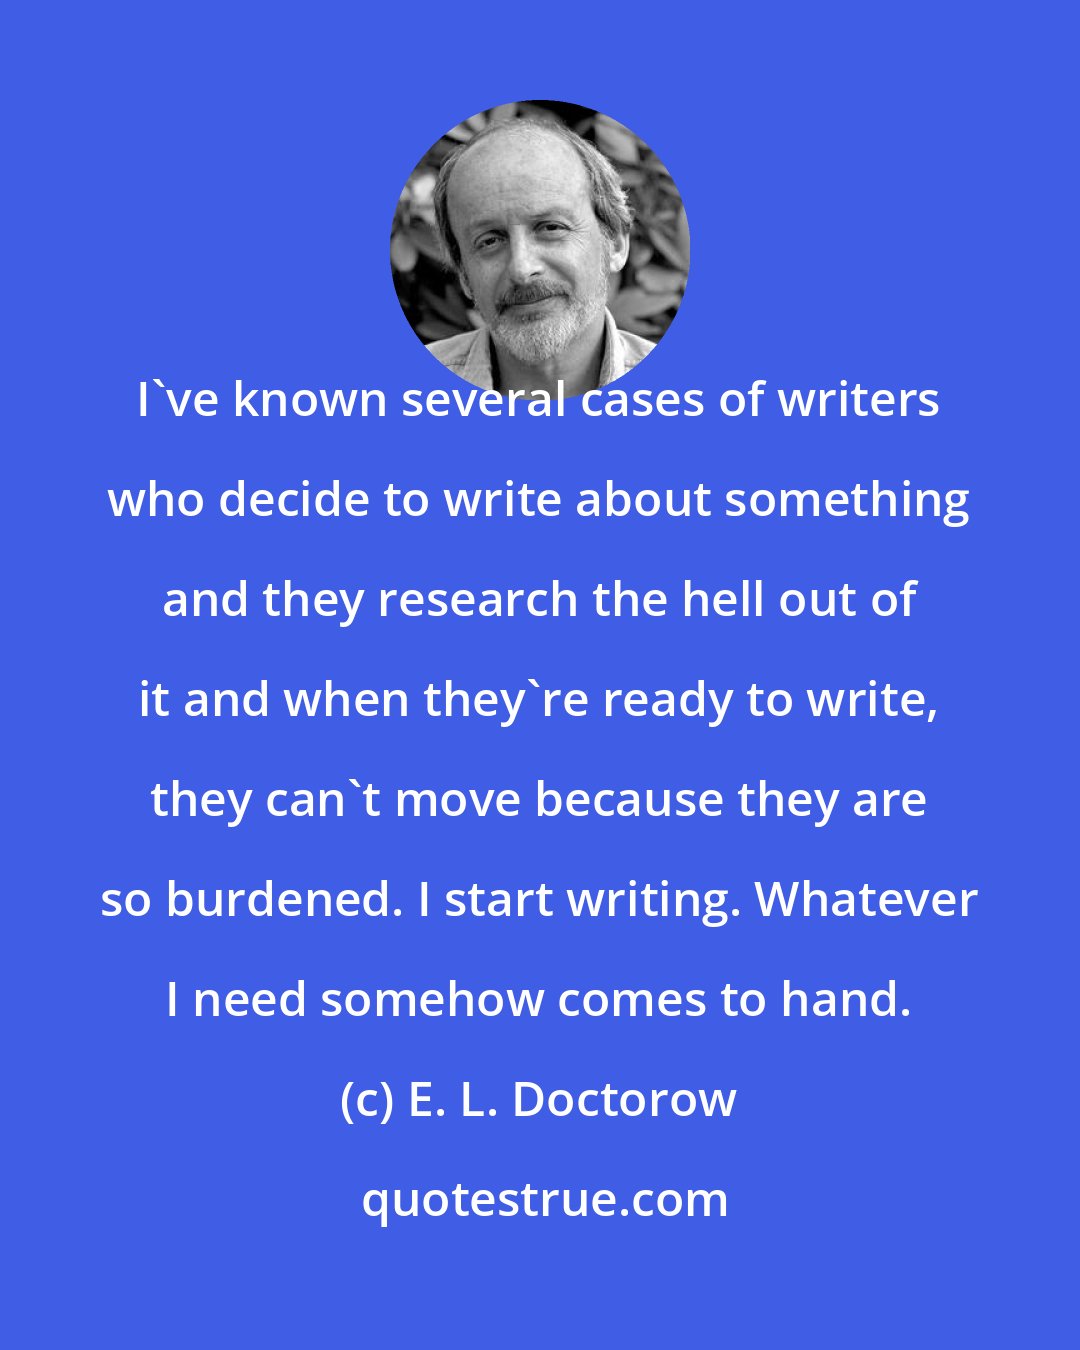 E. L. Doctorow: I've known several cases of writers who decide to write about something and they research the hell out of it and when they're ready to write, they can't move because they are so burdened. I start writing. Whatever I need somehow comes to hand.